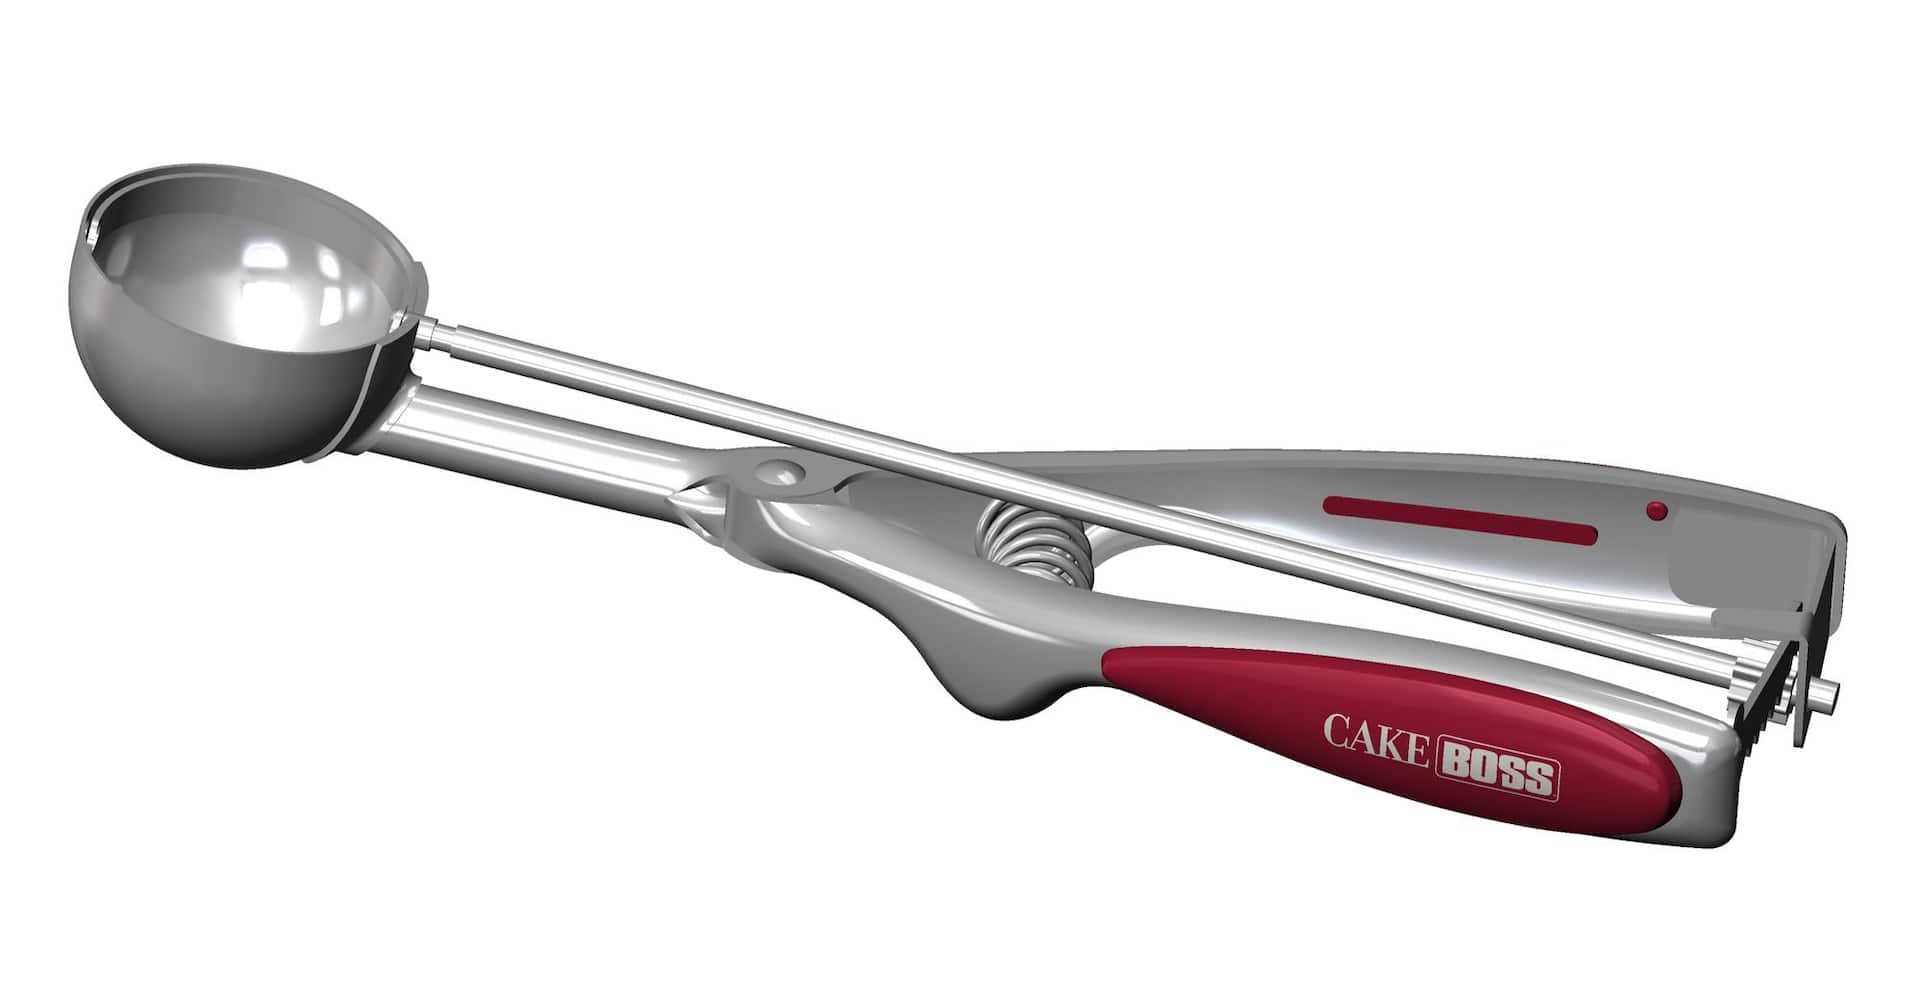 https://media-www.canadiantire.ca/product/living/kitchen/kitchen-tools-thermometers/1428011/cake-boss-medium-mechanical-cookie-scoop-09695176-1812-4c43-8d6a-fa80b8445603-jpgrendition.jpg